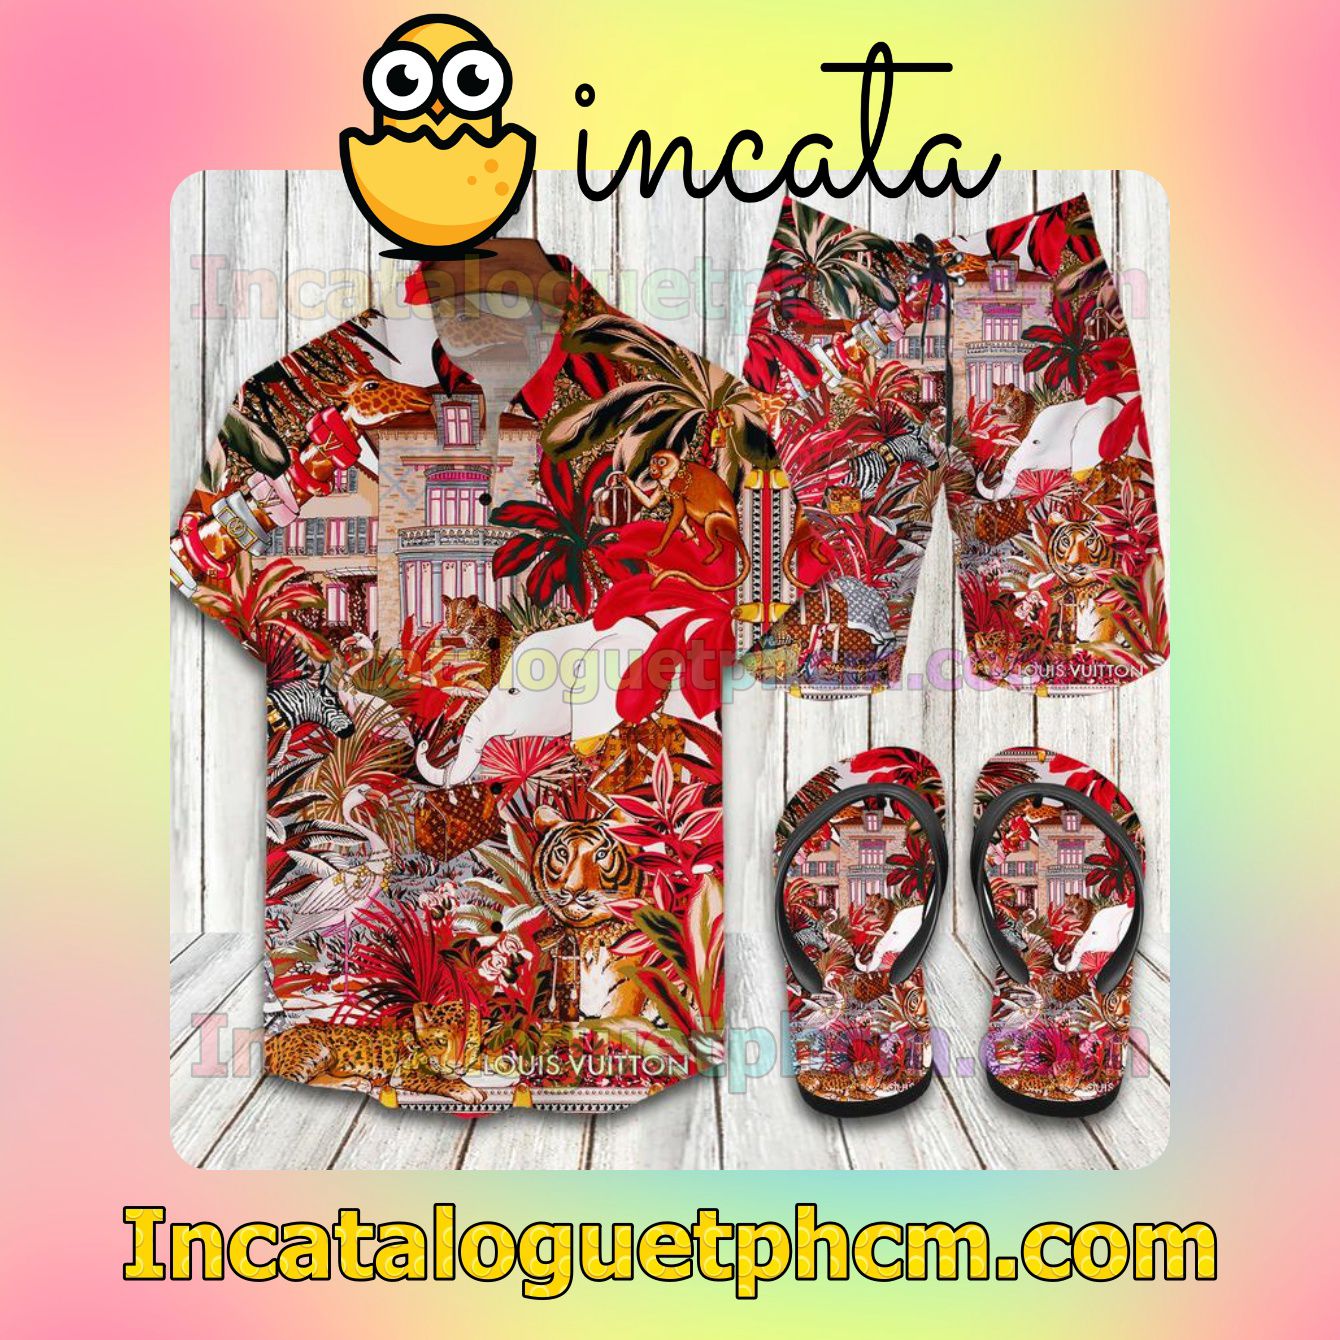 Only For Fan Louis Vuitton Many Animals Aloha Shirt And Shorts